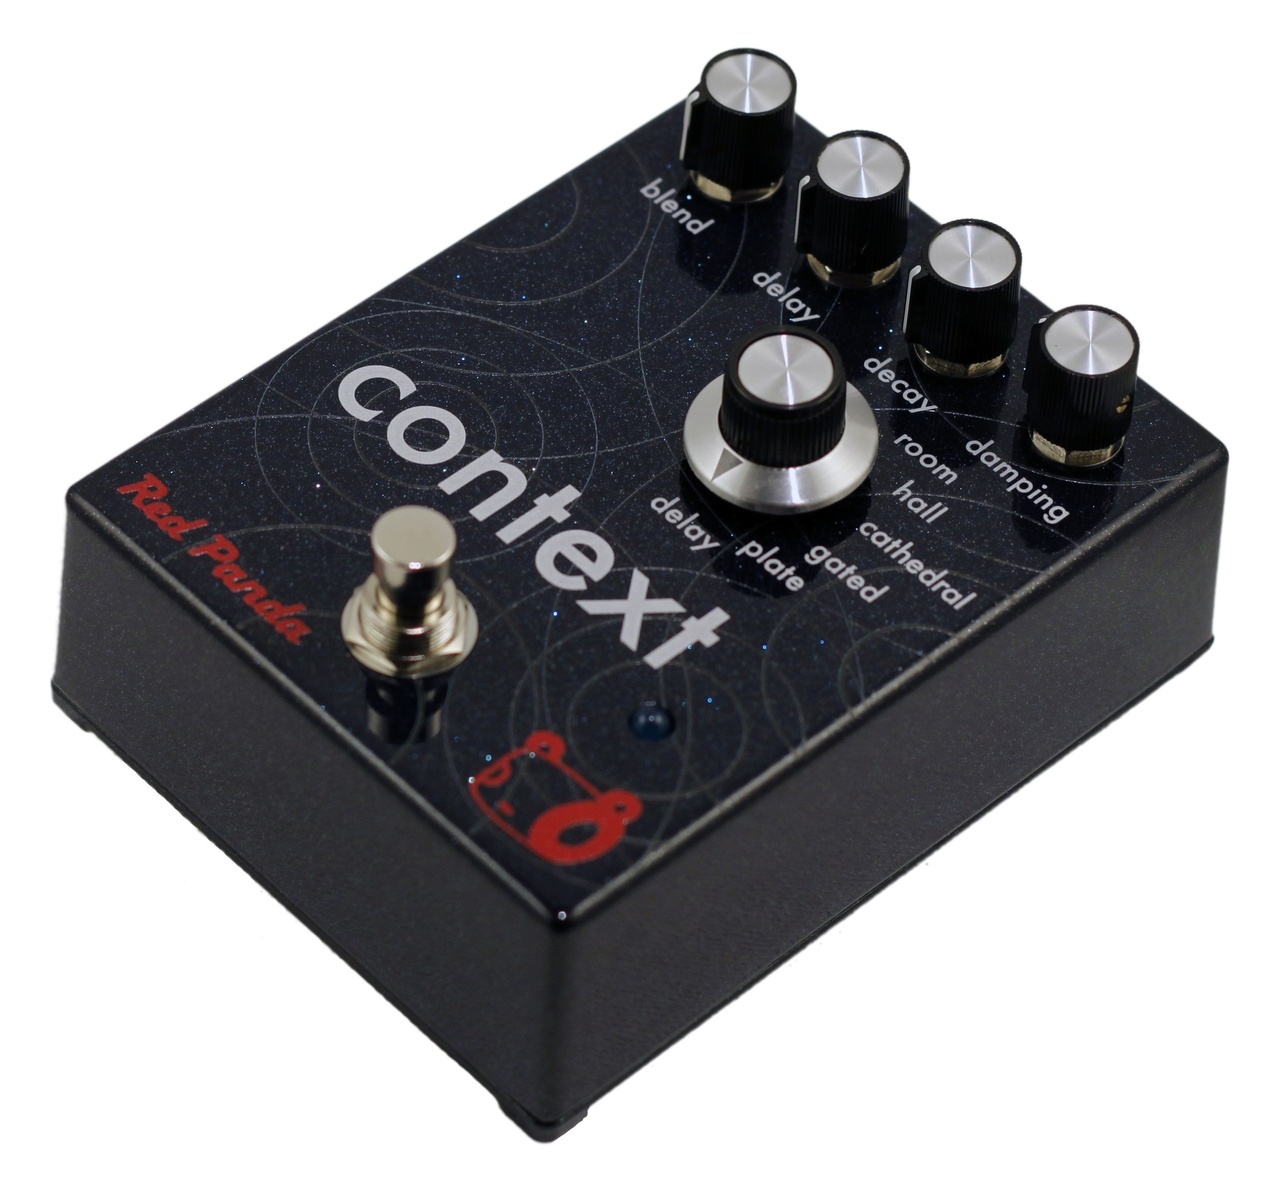 12 Days of Pedals And Effects, Day 3 - Red Panda Context — Pedals